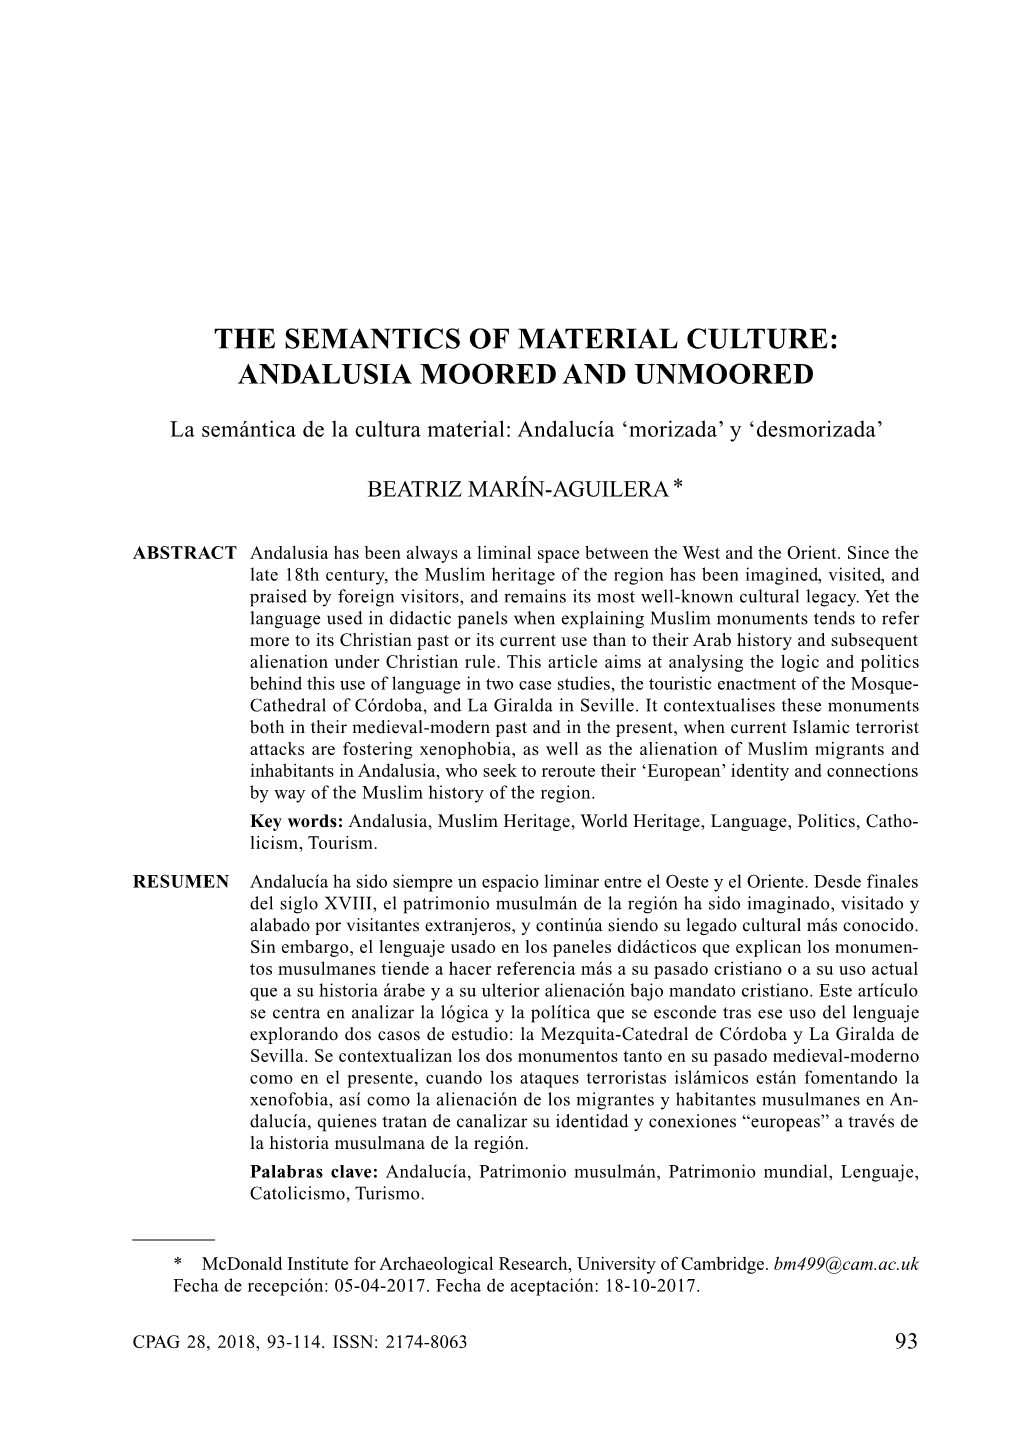 The Semantics of Material Culture: Andalusia Moored and Unmoored